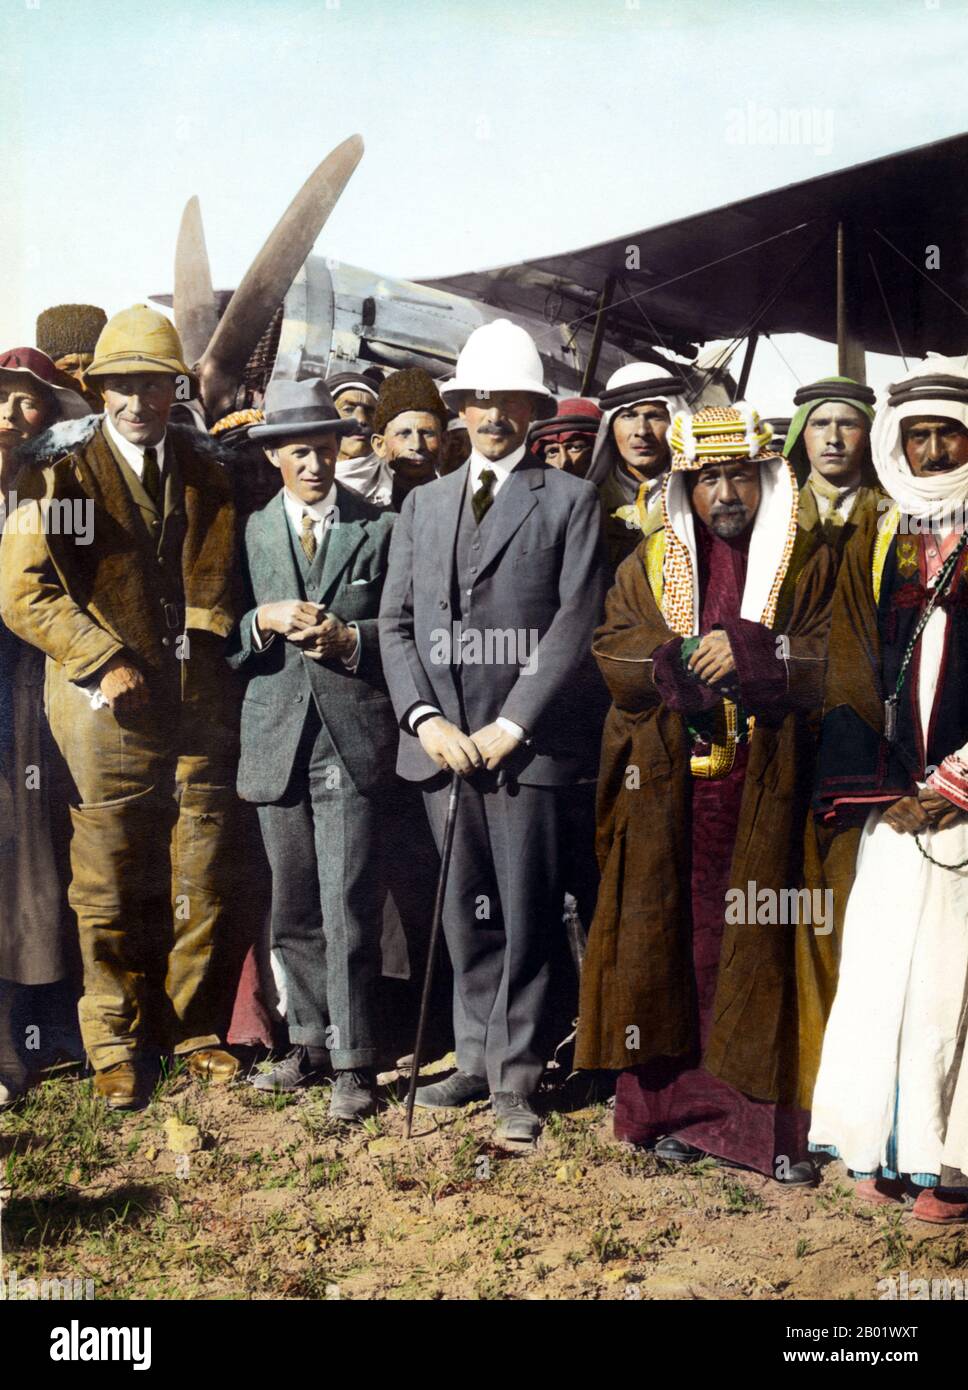 Jordan: King Abdullah I of Jordan with T. E. Lawrence (Lawrence of Arabia), Sir Herbert Samuel, Sheik Majid Pasha el Adwan (far right) and Gertrude Bell (left) at the aerodrome of Amman, April 1921.  Abdullah I bin al-Hussein (February 1882 - 20 July 1951), King of Jordan, was the second of three sons of Sherif Hussein bin Ali, Sharif and Emir of Mecca.  Lieutenant Colonel Thomas Edward Lawrence, CB, DSO (16 August 1888 - 19 May 1935), known professionally as T. E. Lawrence, was a British Army officer renowned especially for his liaison role during the Arab Revolt against Ottoman Turkish rule. Stock Photo